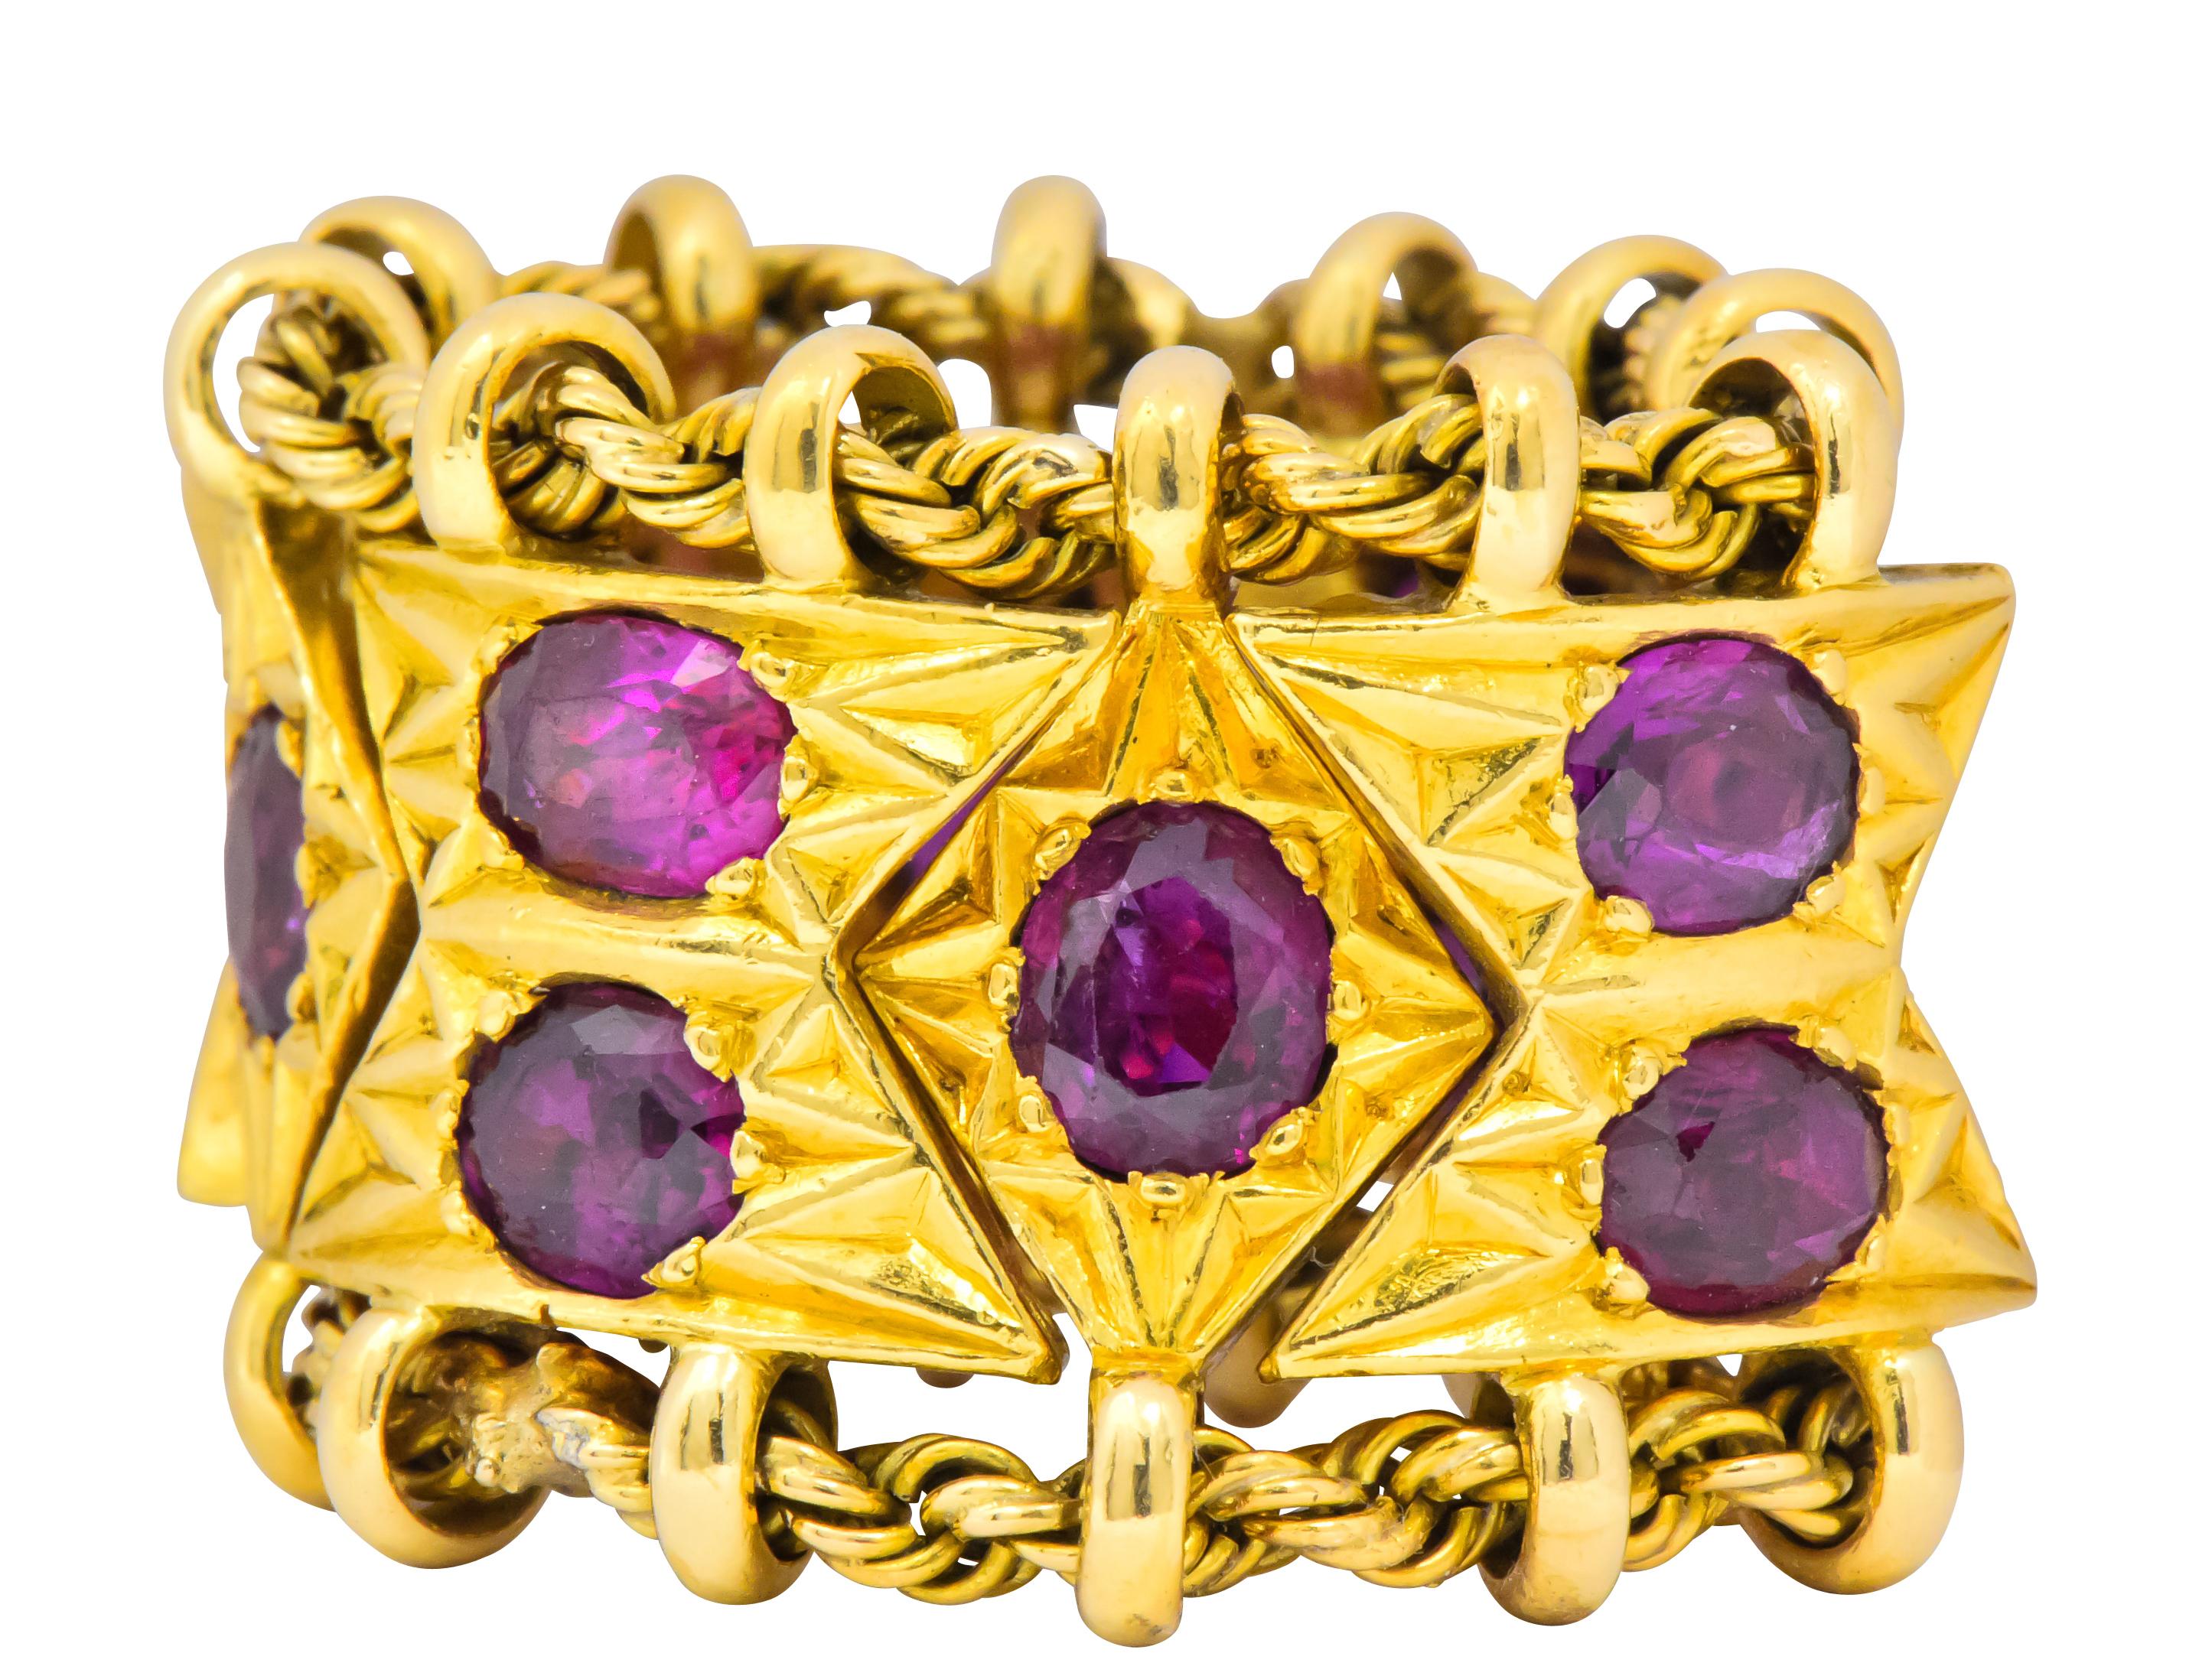 Really unique band style ring featuring dynamic chevron and navette shaped gold links each connected by a twisted gold rope chain; fully articulated

Bead set throughout by twelve well-matched oval cut rubies weighing in total 7.50 carats; very